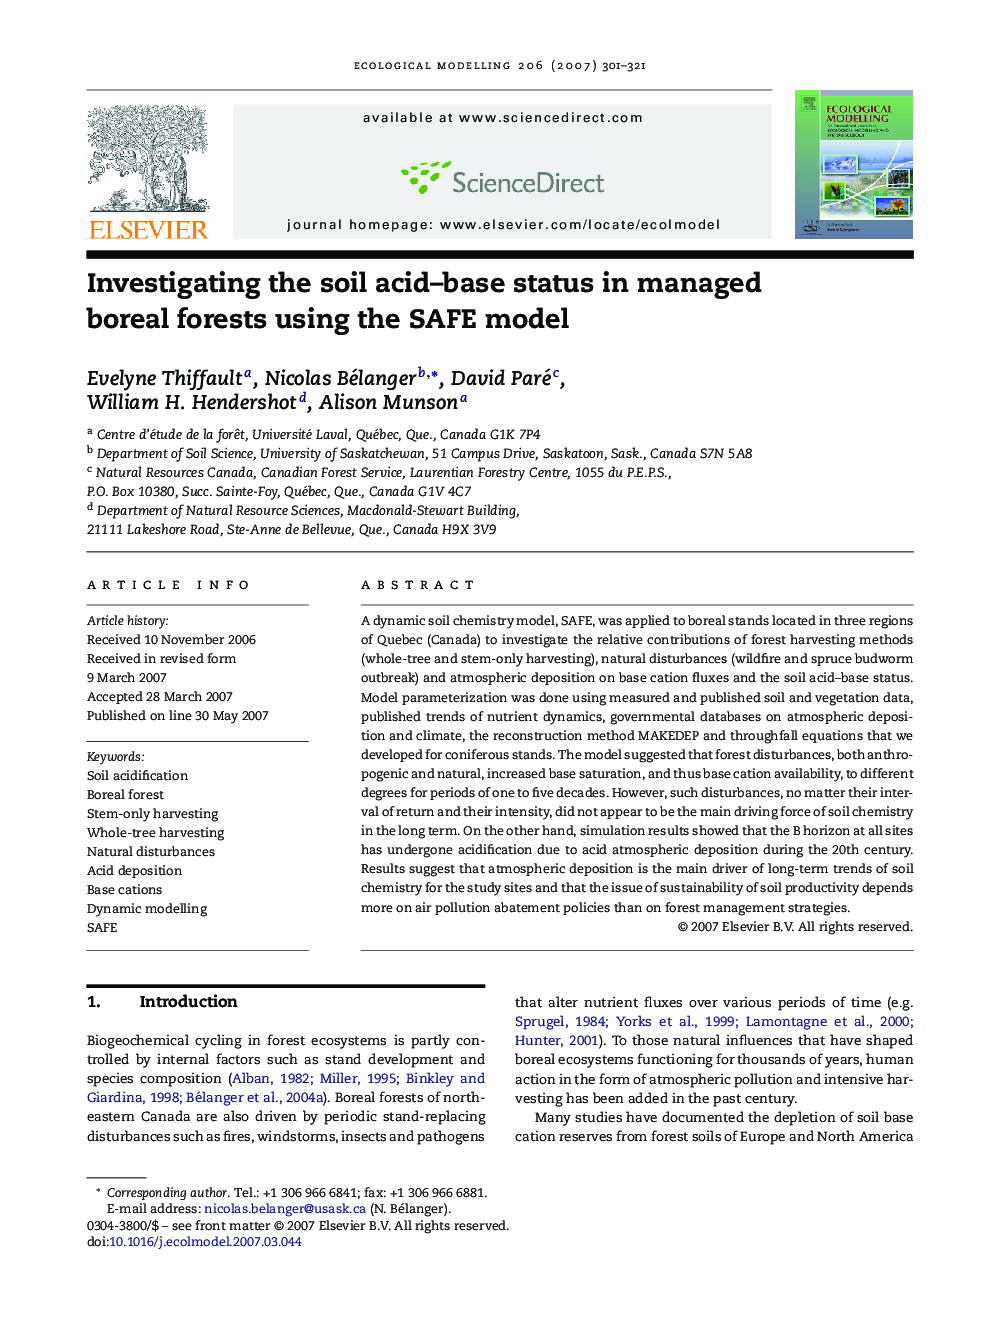 Investigating the soil acid–base status in managed boreal forests using the SAFE model